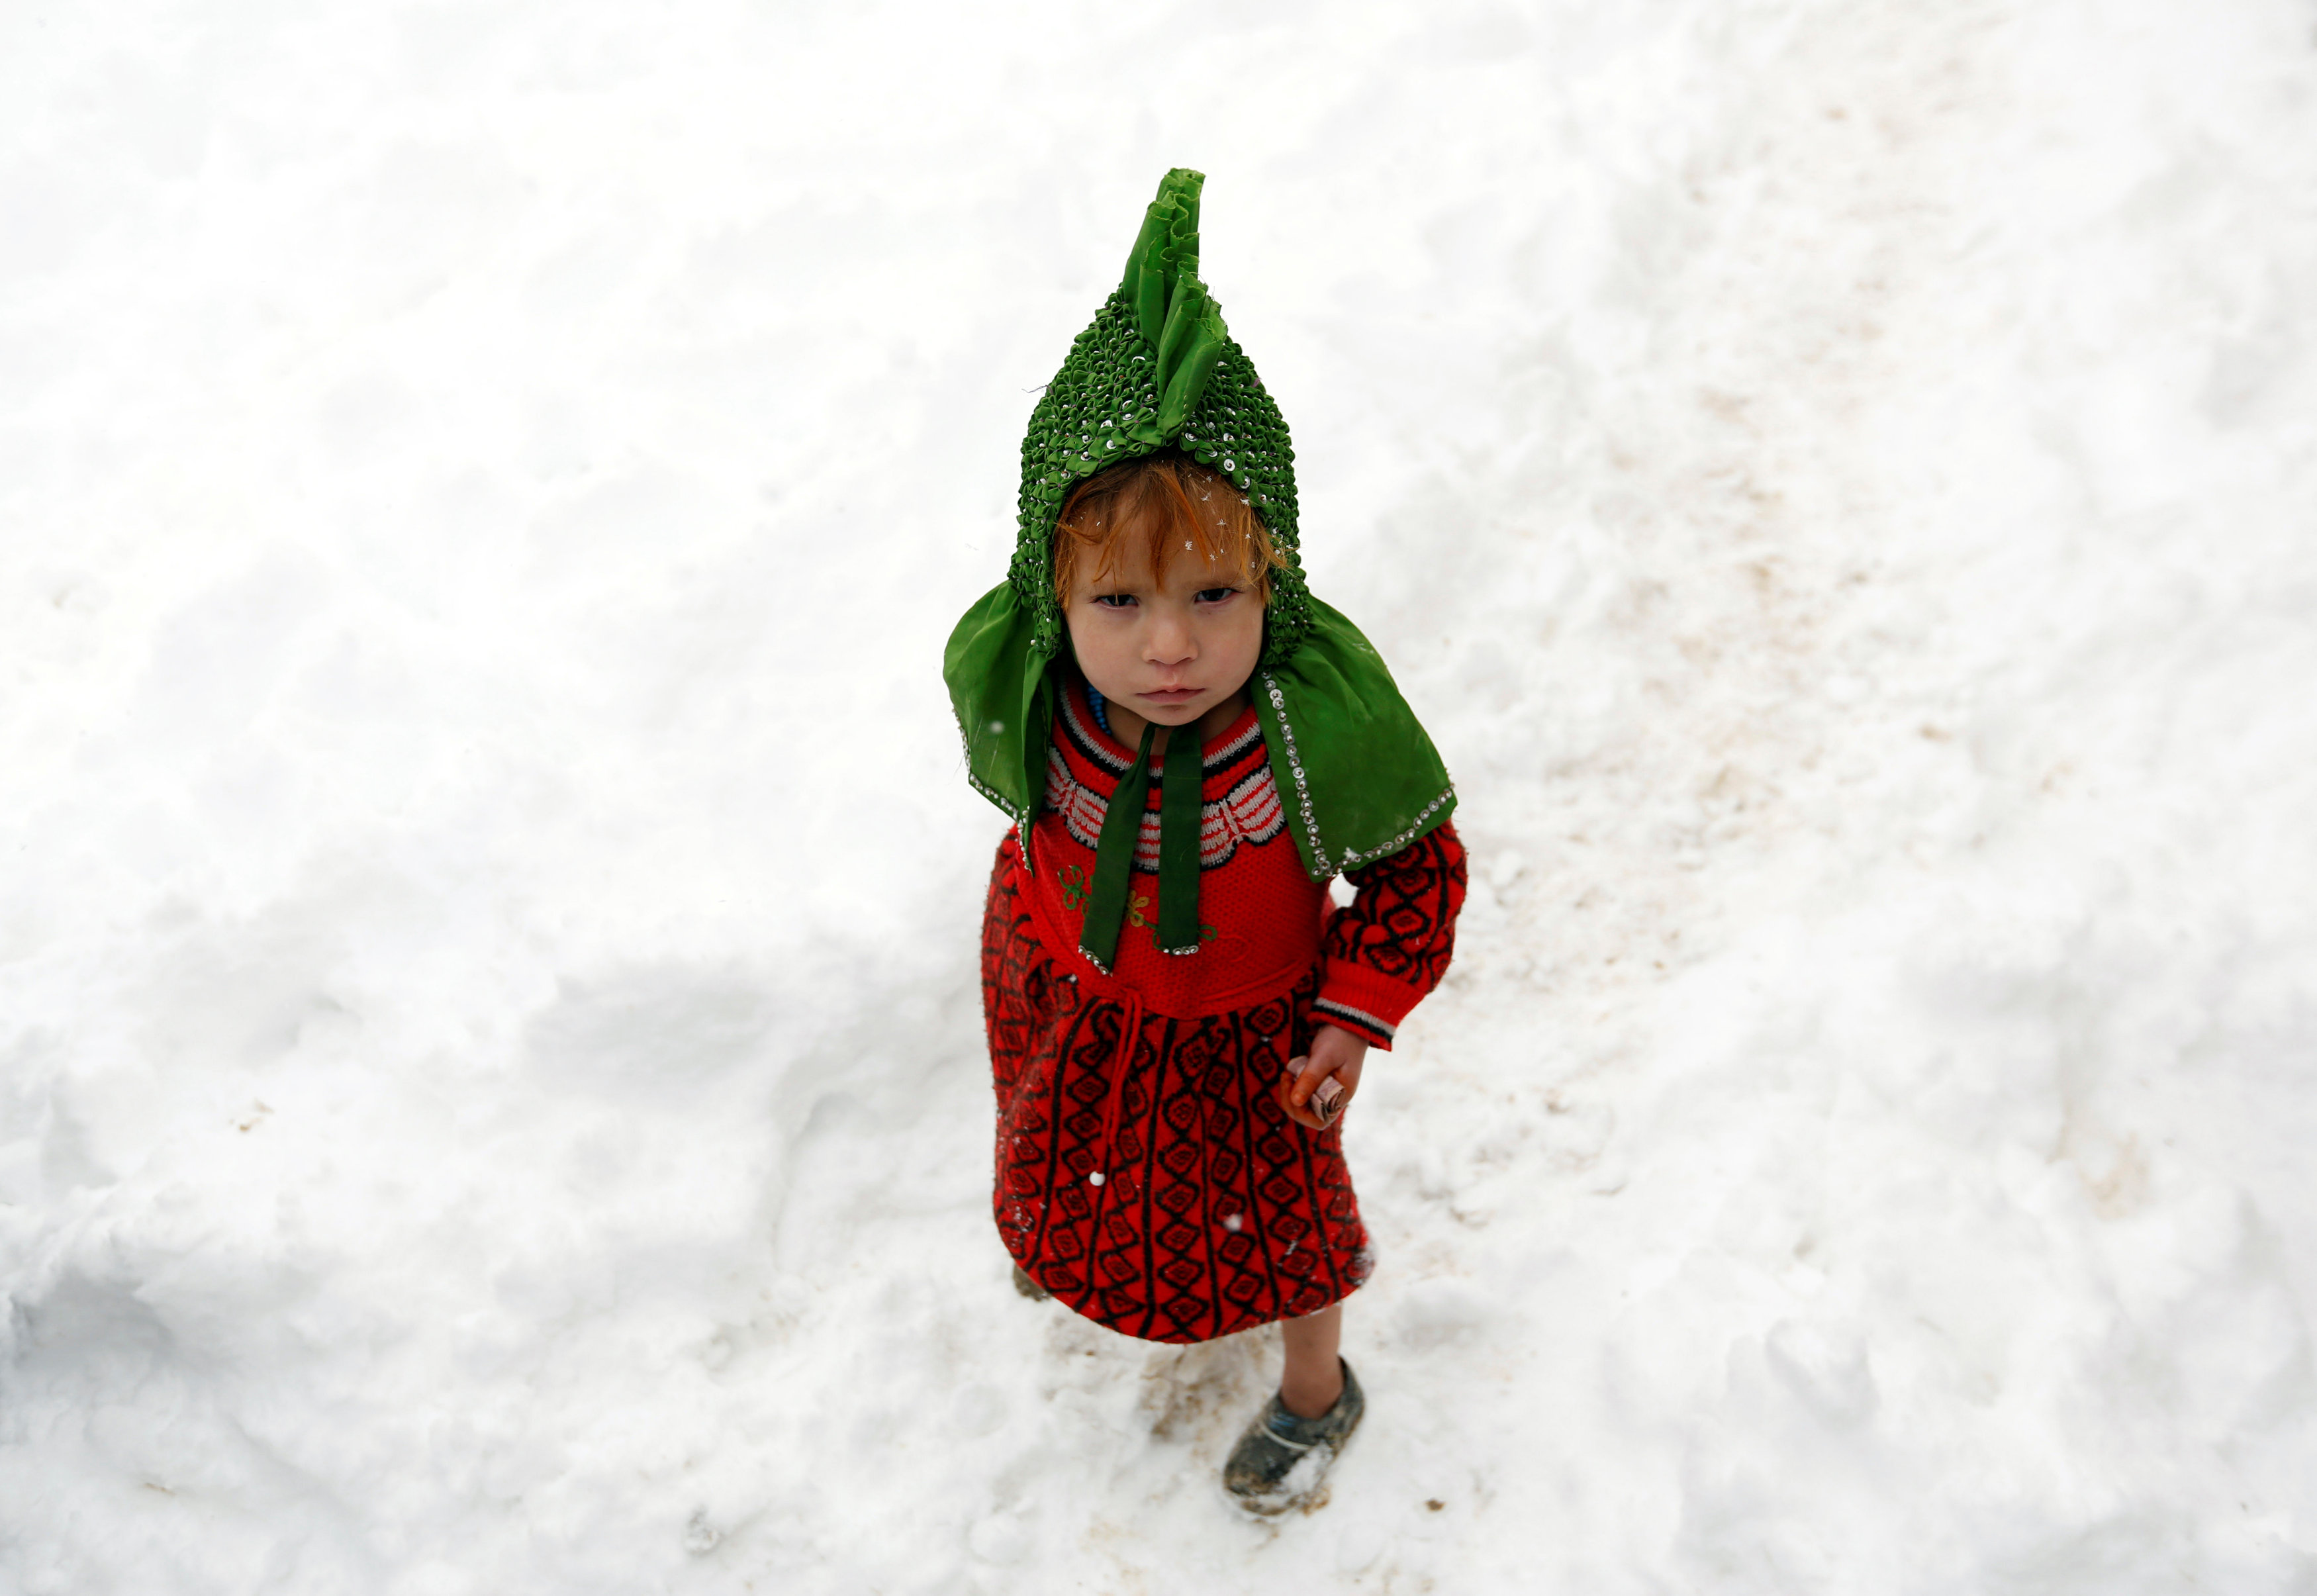 An Internally displaced Afghan child stands outside her shelter during a snowfall in Kabul, Afghanistan February  5, 2017. REUTERS/Mohammad Ismail